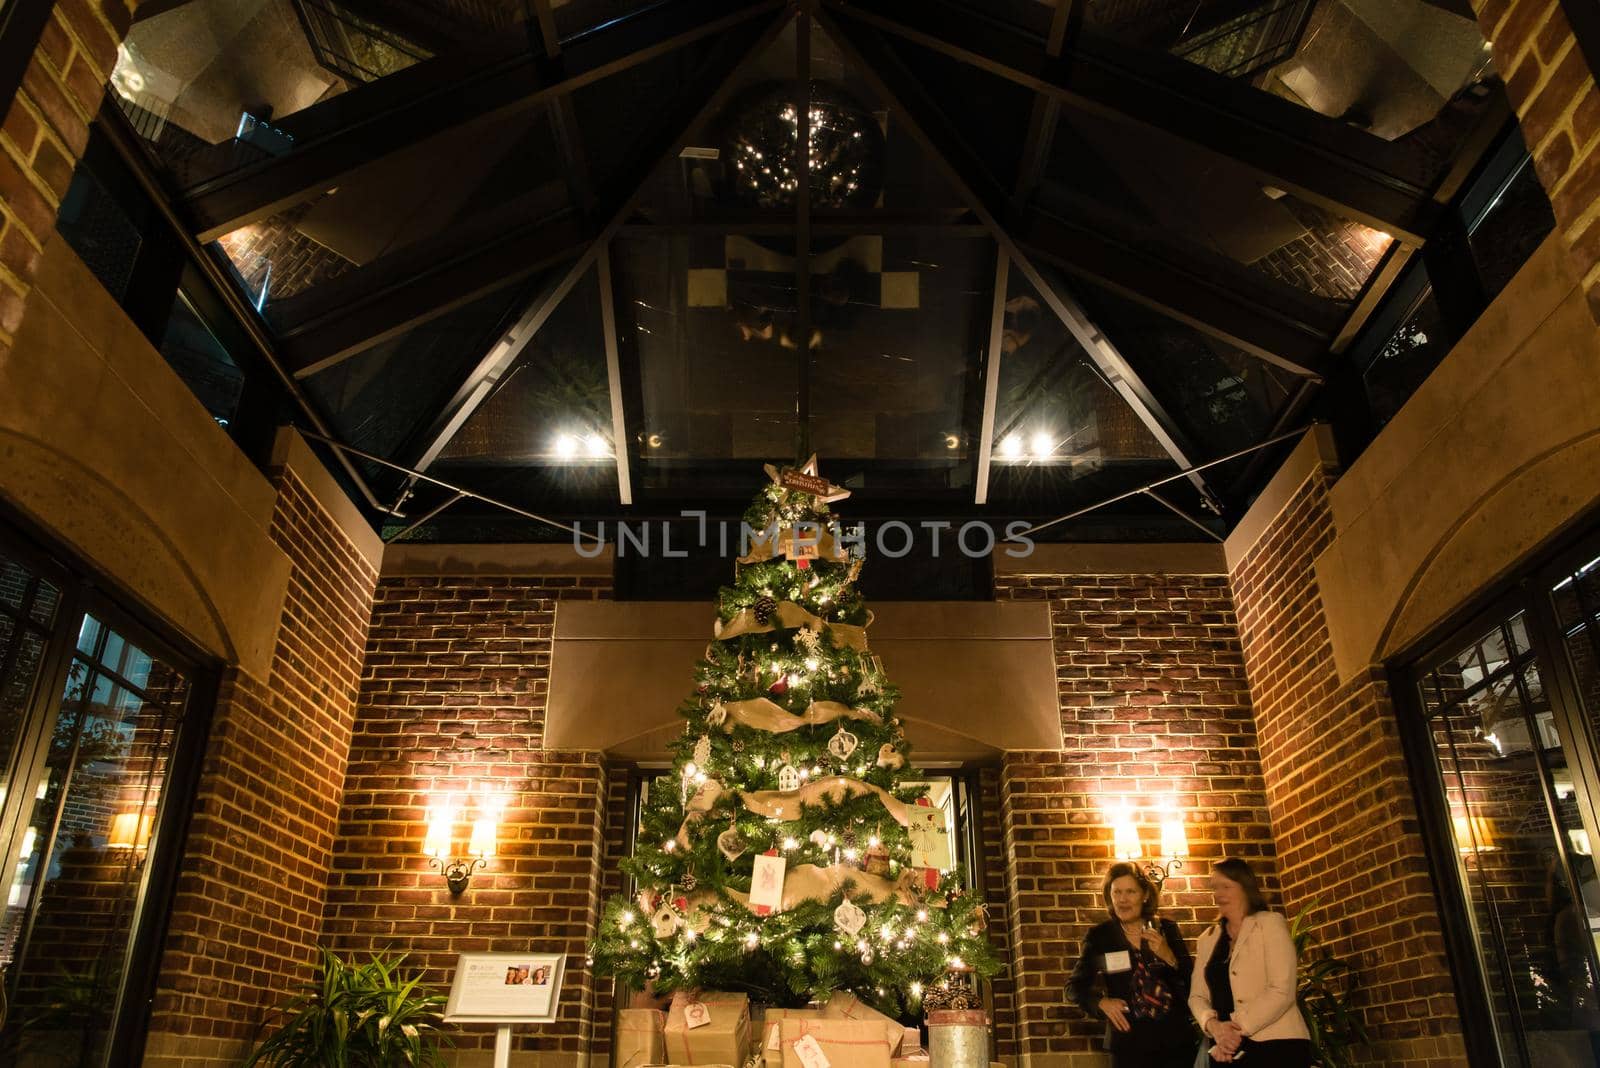 Glowing Christmas tree display with pretty architecture. Wide view by jyurinko